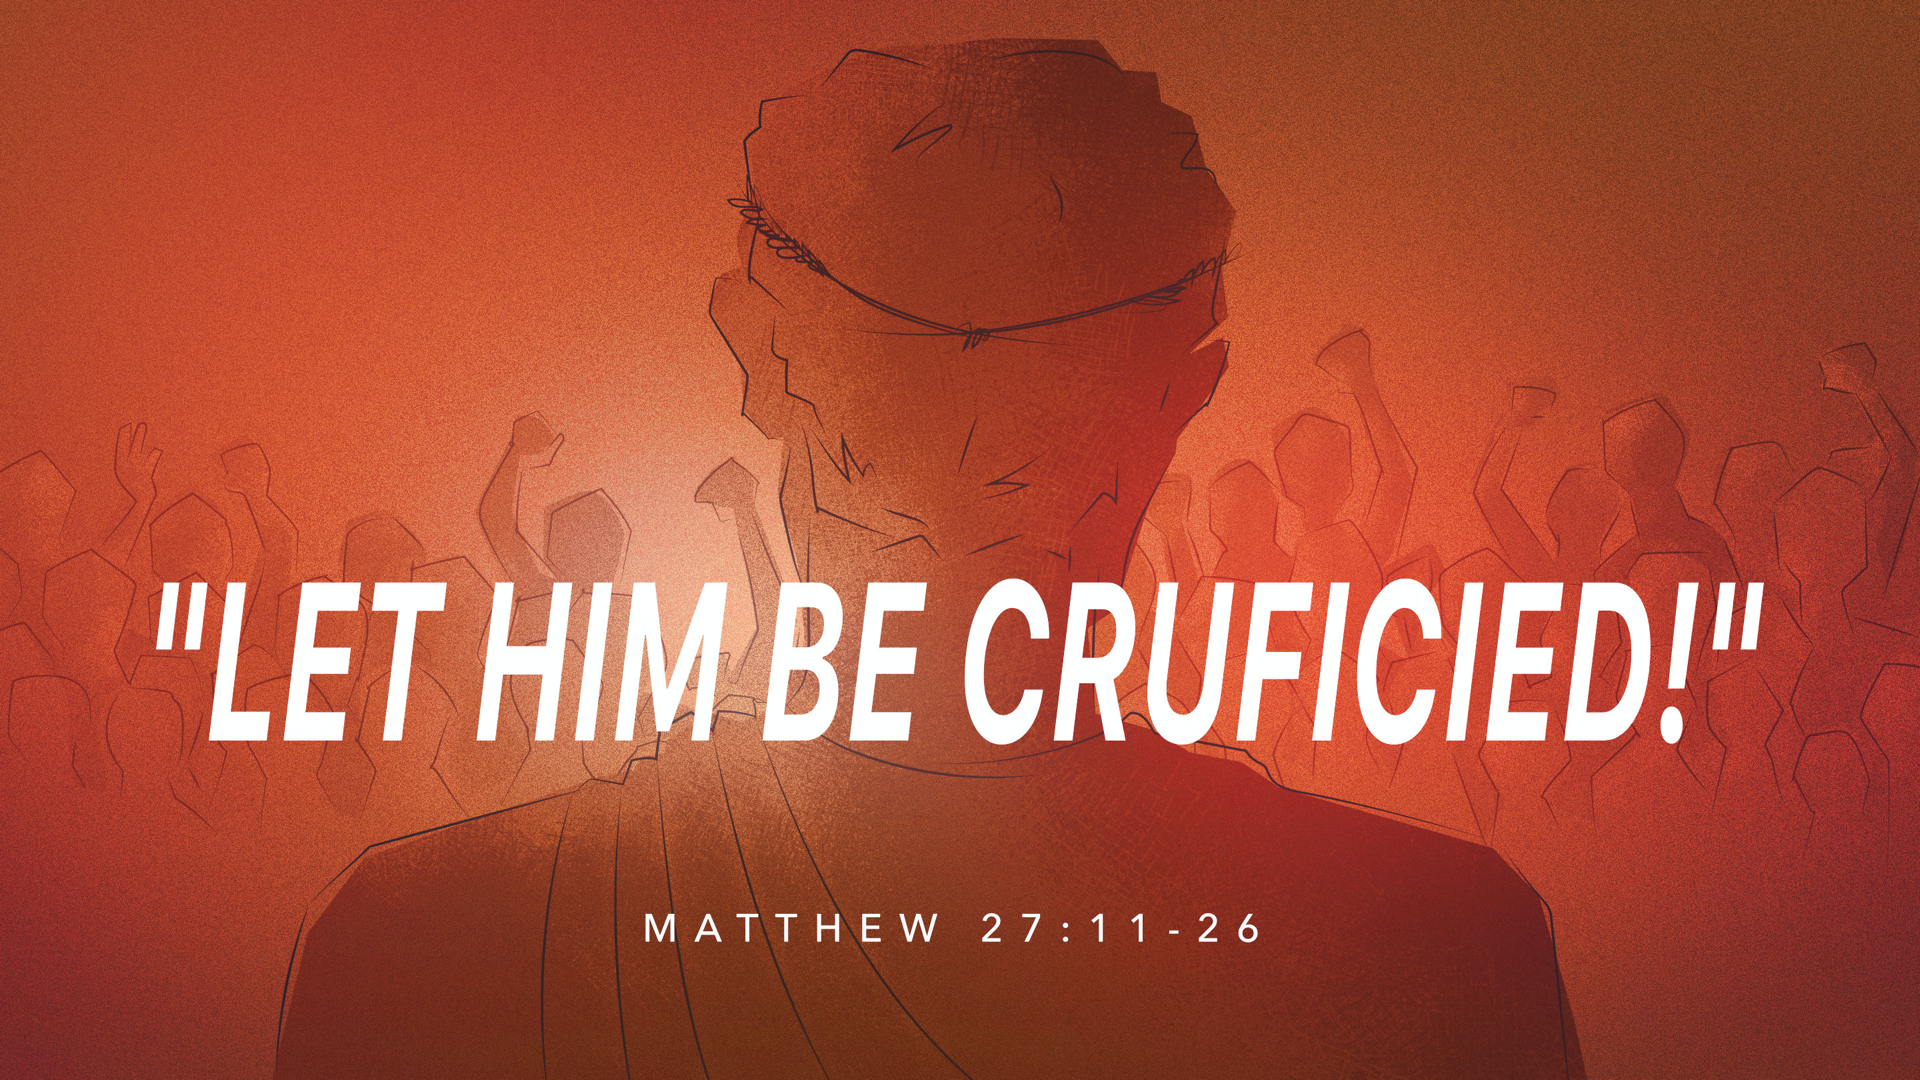 22.1.30a - Matthew 27.11-26 - Let Him Be Crucified - Title.001.png